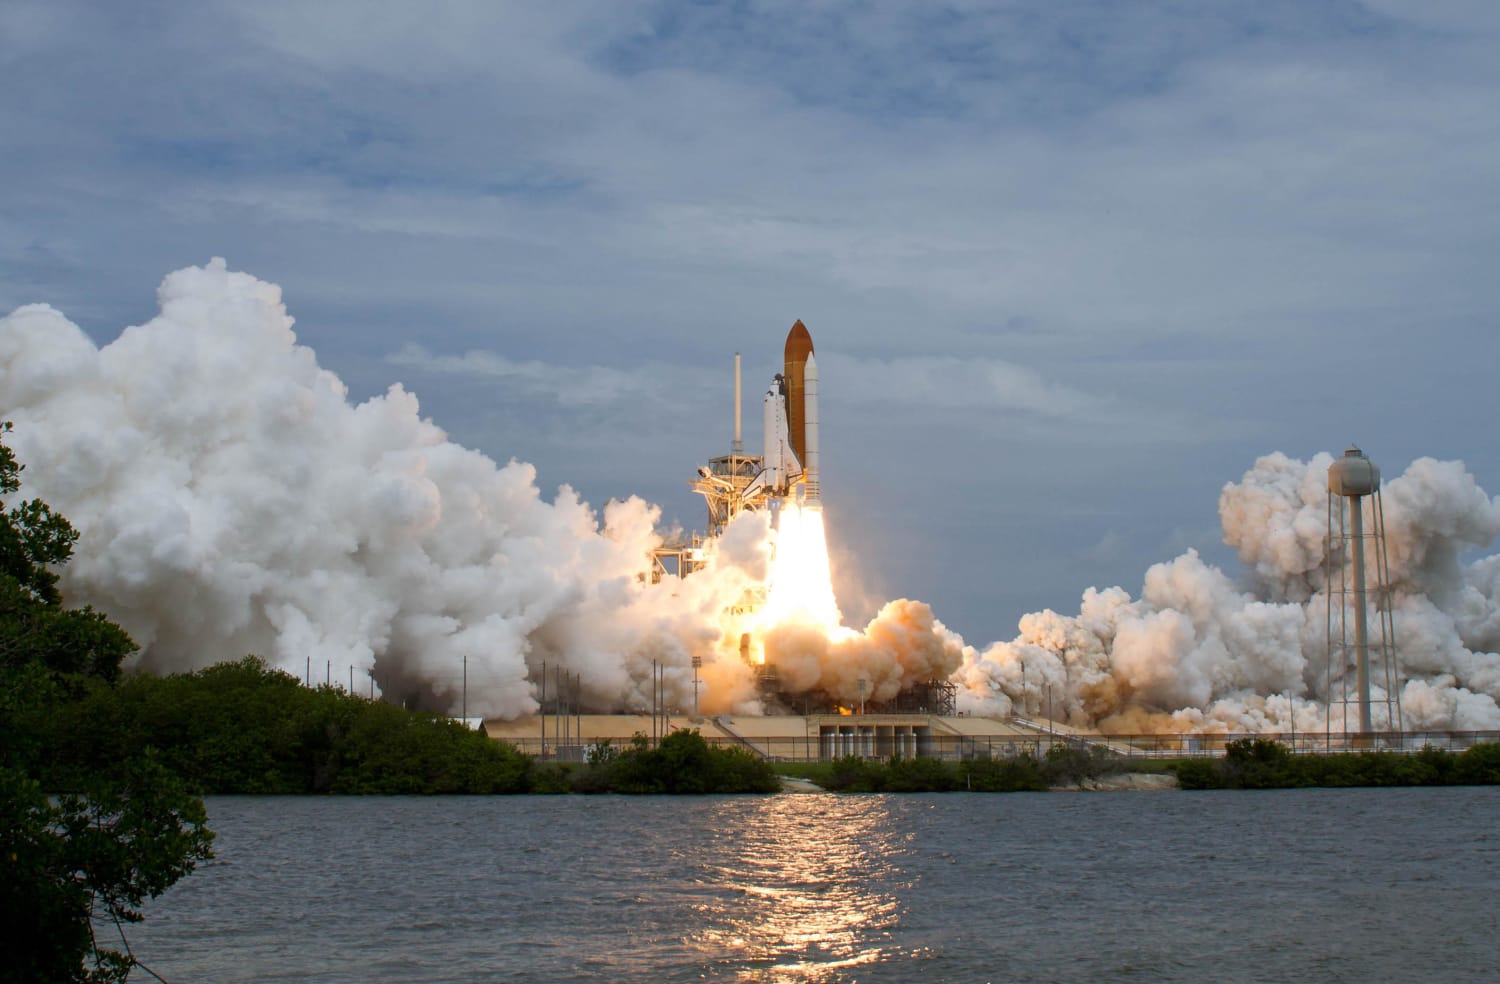 Space Shuttle Atlantis launched on Friday, July 8, 2011, from NASA's Kennedy Space Center, Florida on the last shuttle mission. Now no longer the last manned mission launched from the USA